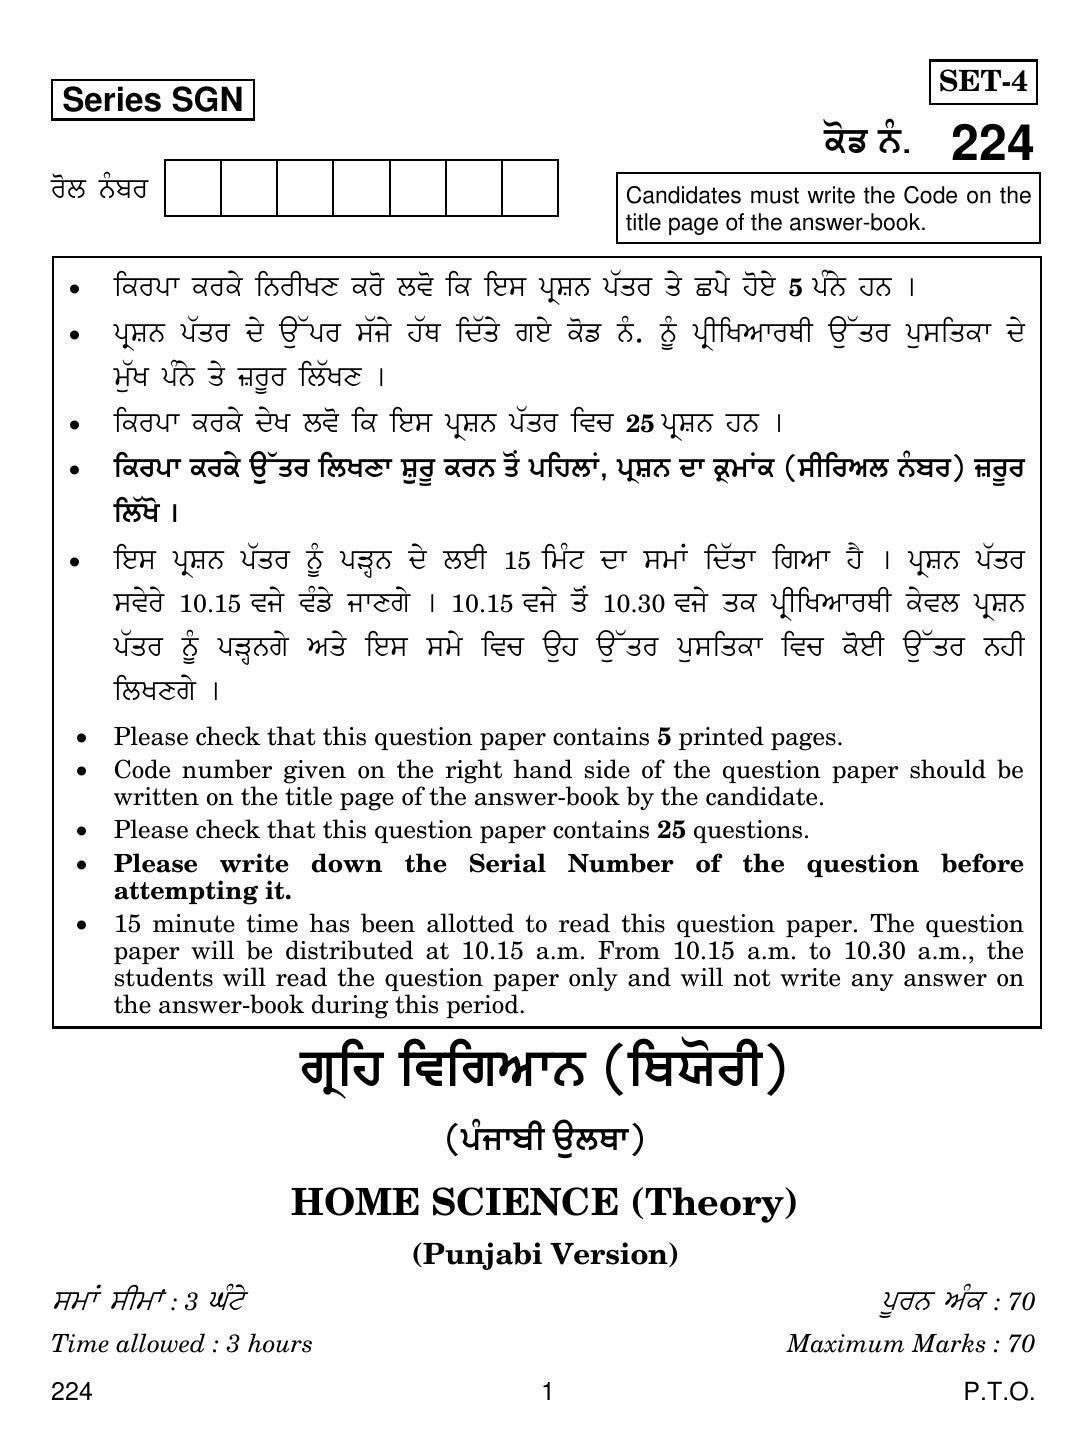 CBSE Class 12 224 HOME SCIENCE PUNJABI VERSION 2018 Question Paper - Page 1